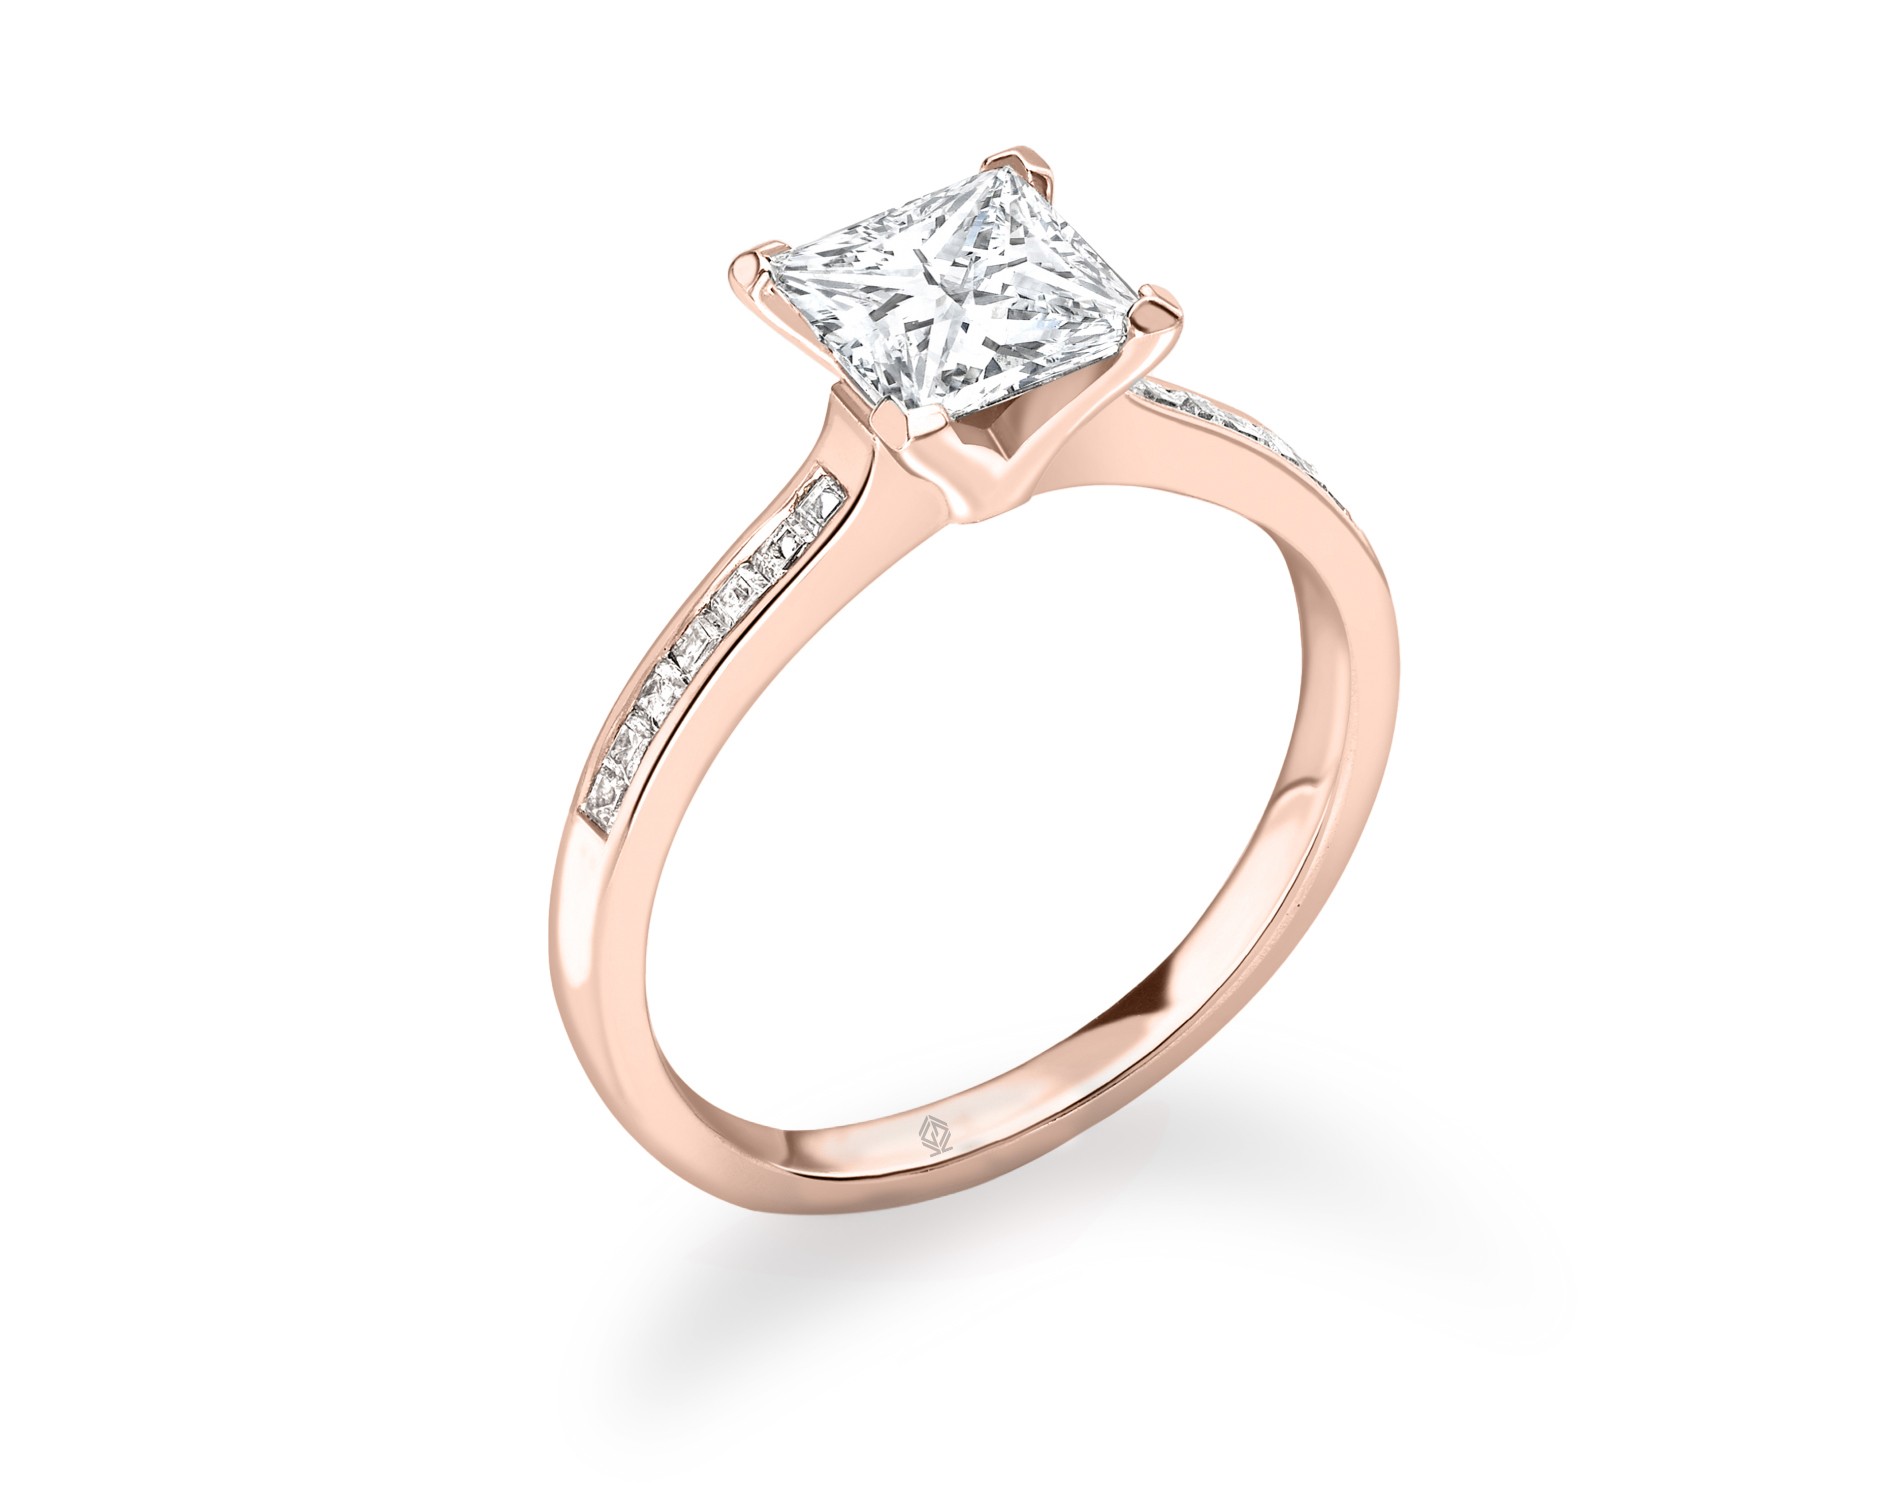 18K ROSE GOLD 4 PRONGS PRINCESS CUT DIAMOND ENGAGEMENT RING WITH SIDE STONES CHANNEL SET